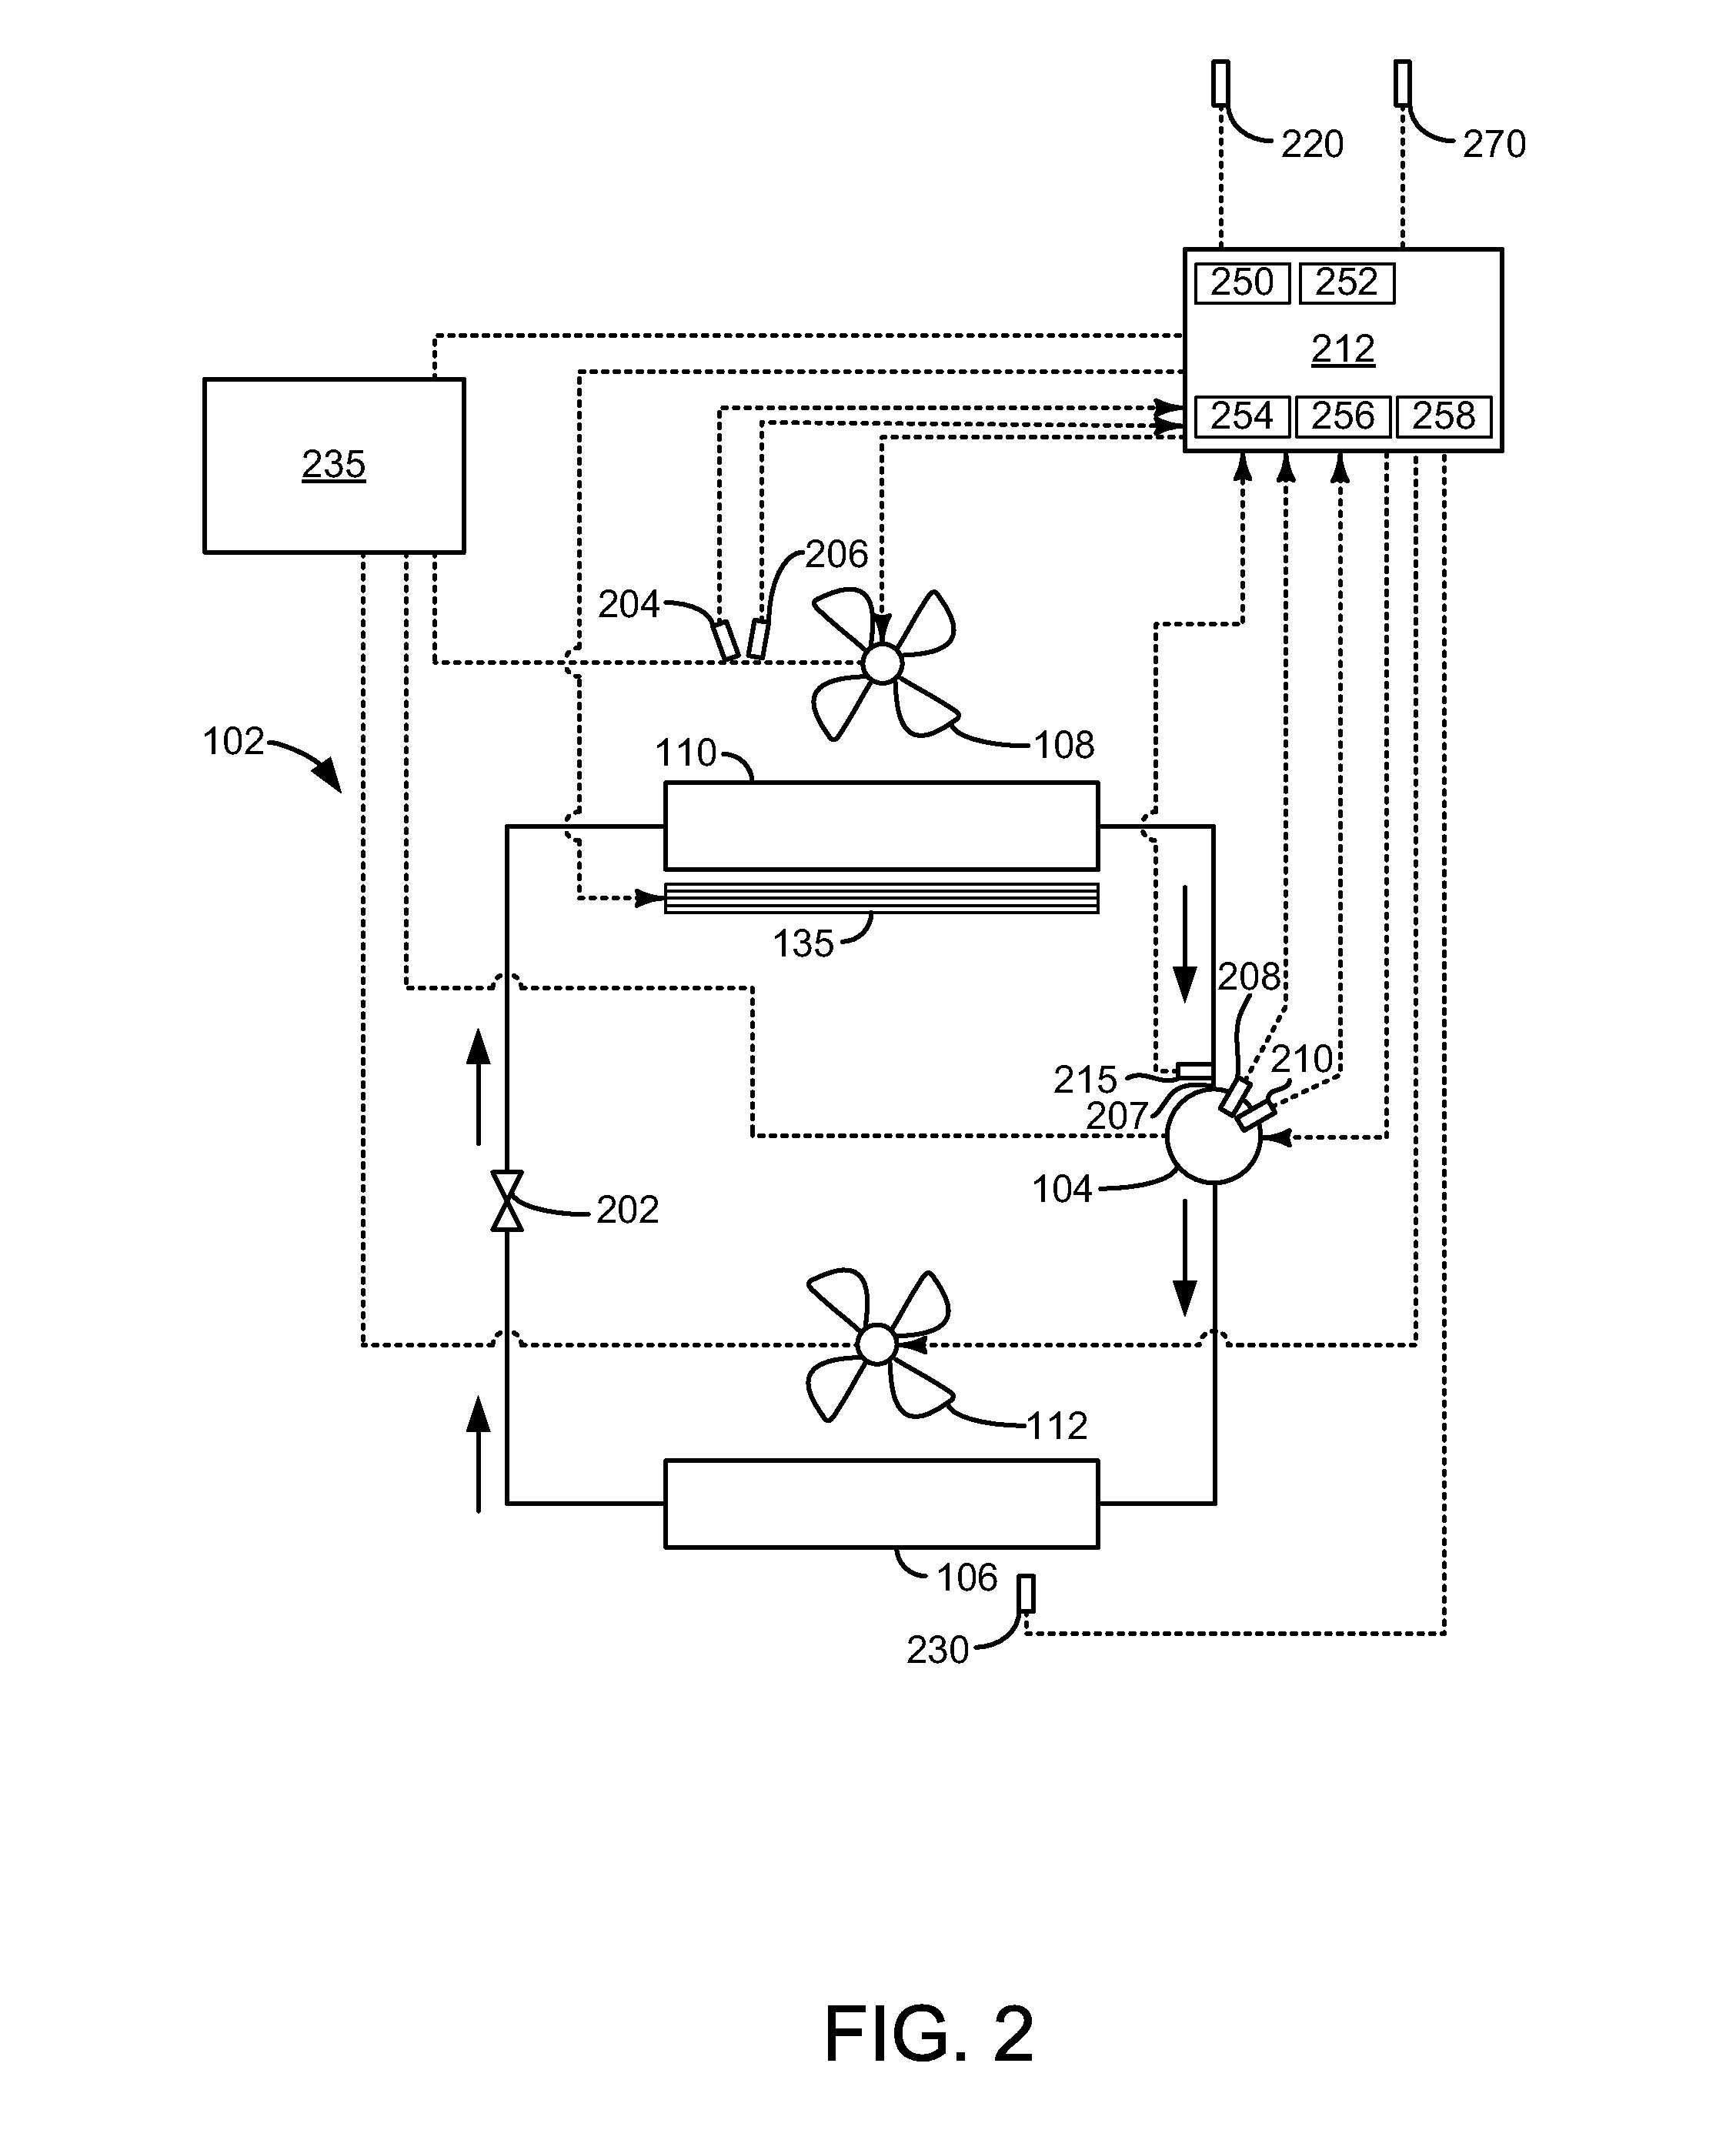 Method for adjusting fan and compressor power for a vehicle cabin heating system